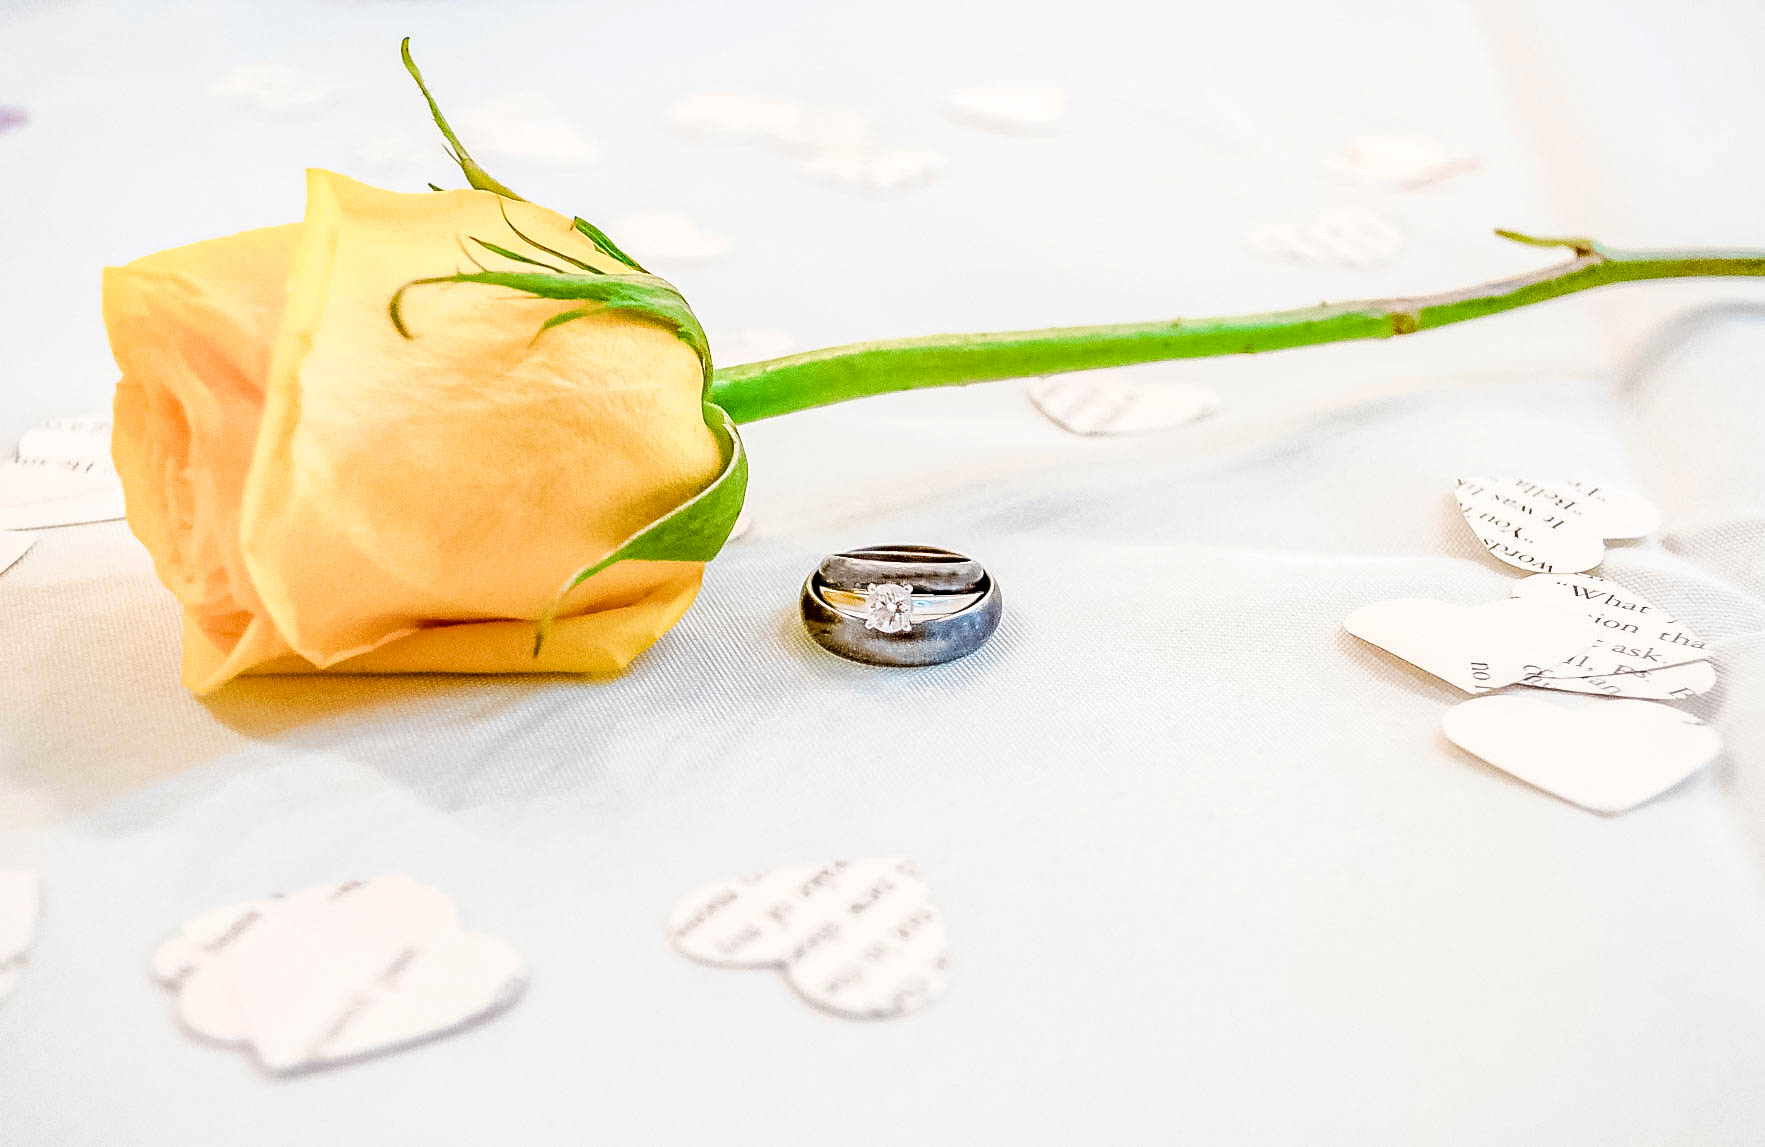 wedding rings stacked on table by yellow long stem rose and paper heart confetti